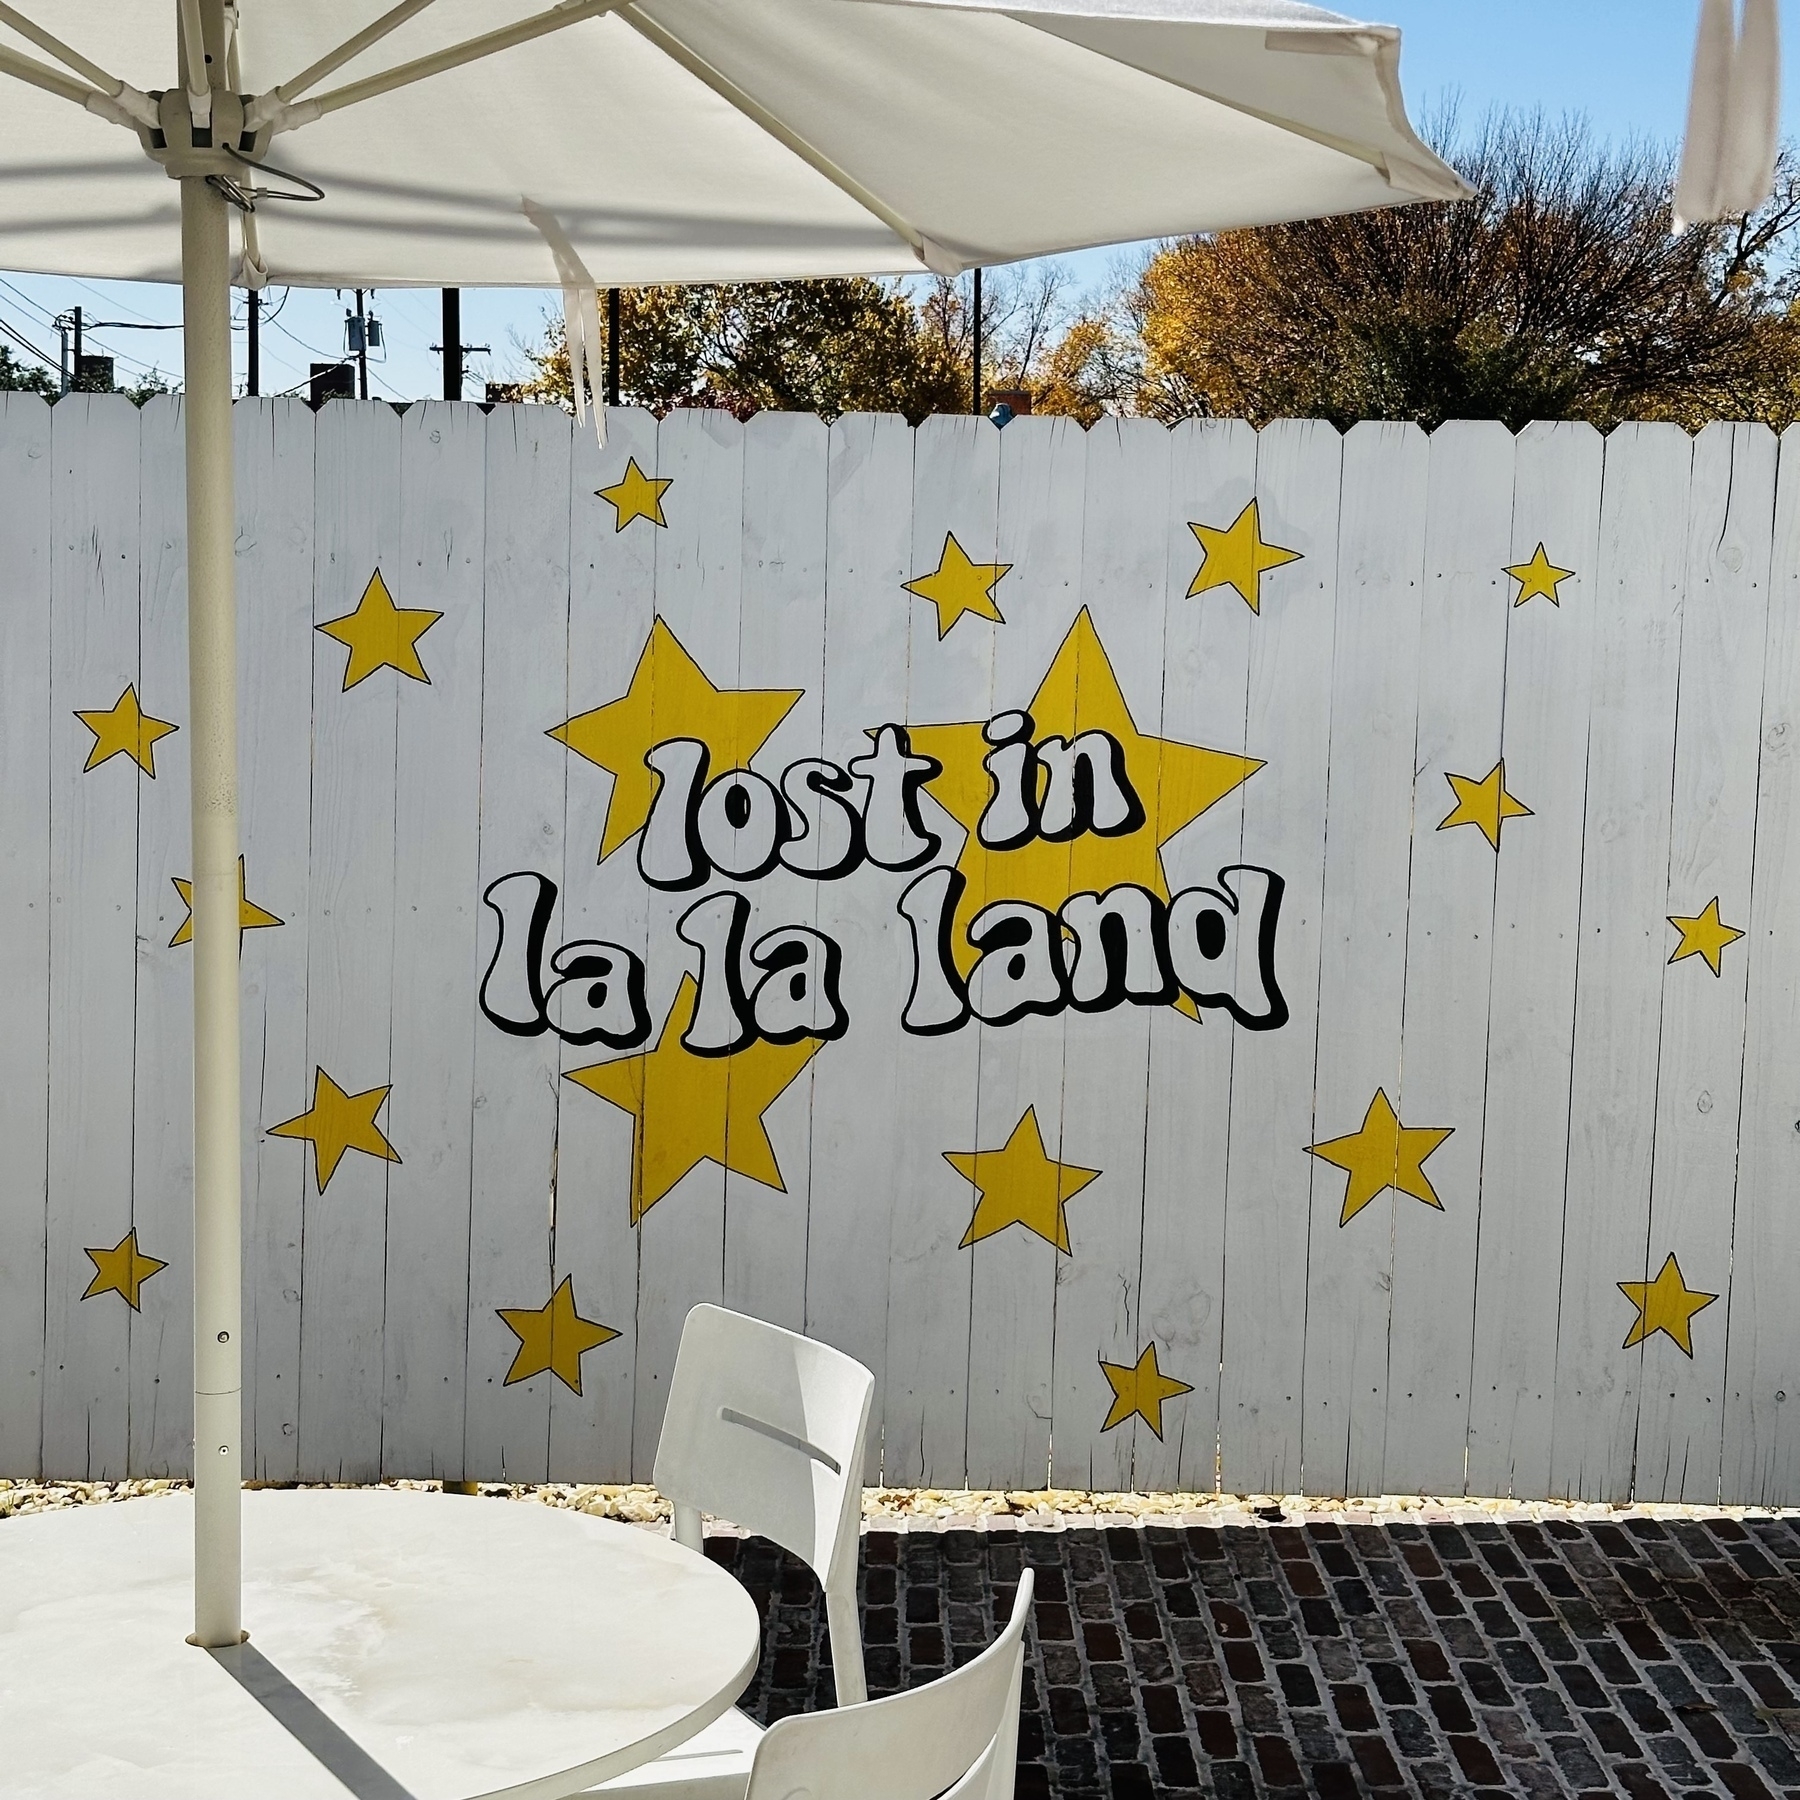 Outside patio, fence with “lost in la la land” painted on it with yellow stars.